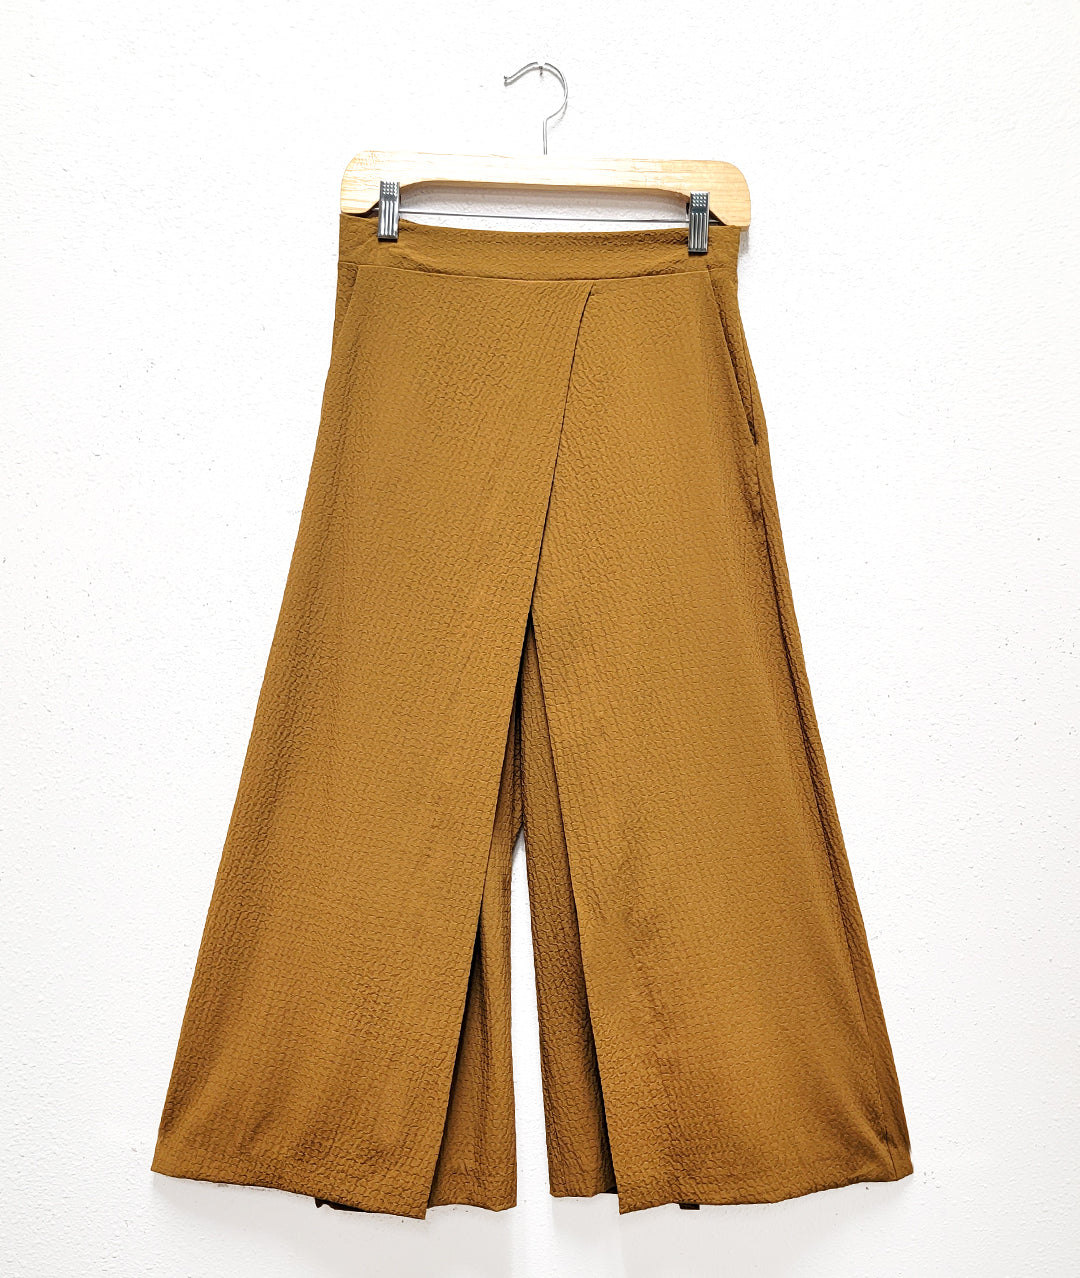 wide leg dijon yellow pant with an overlapping layer on either leg, creating a skirt look